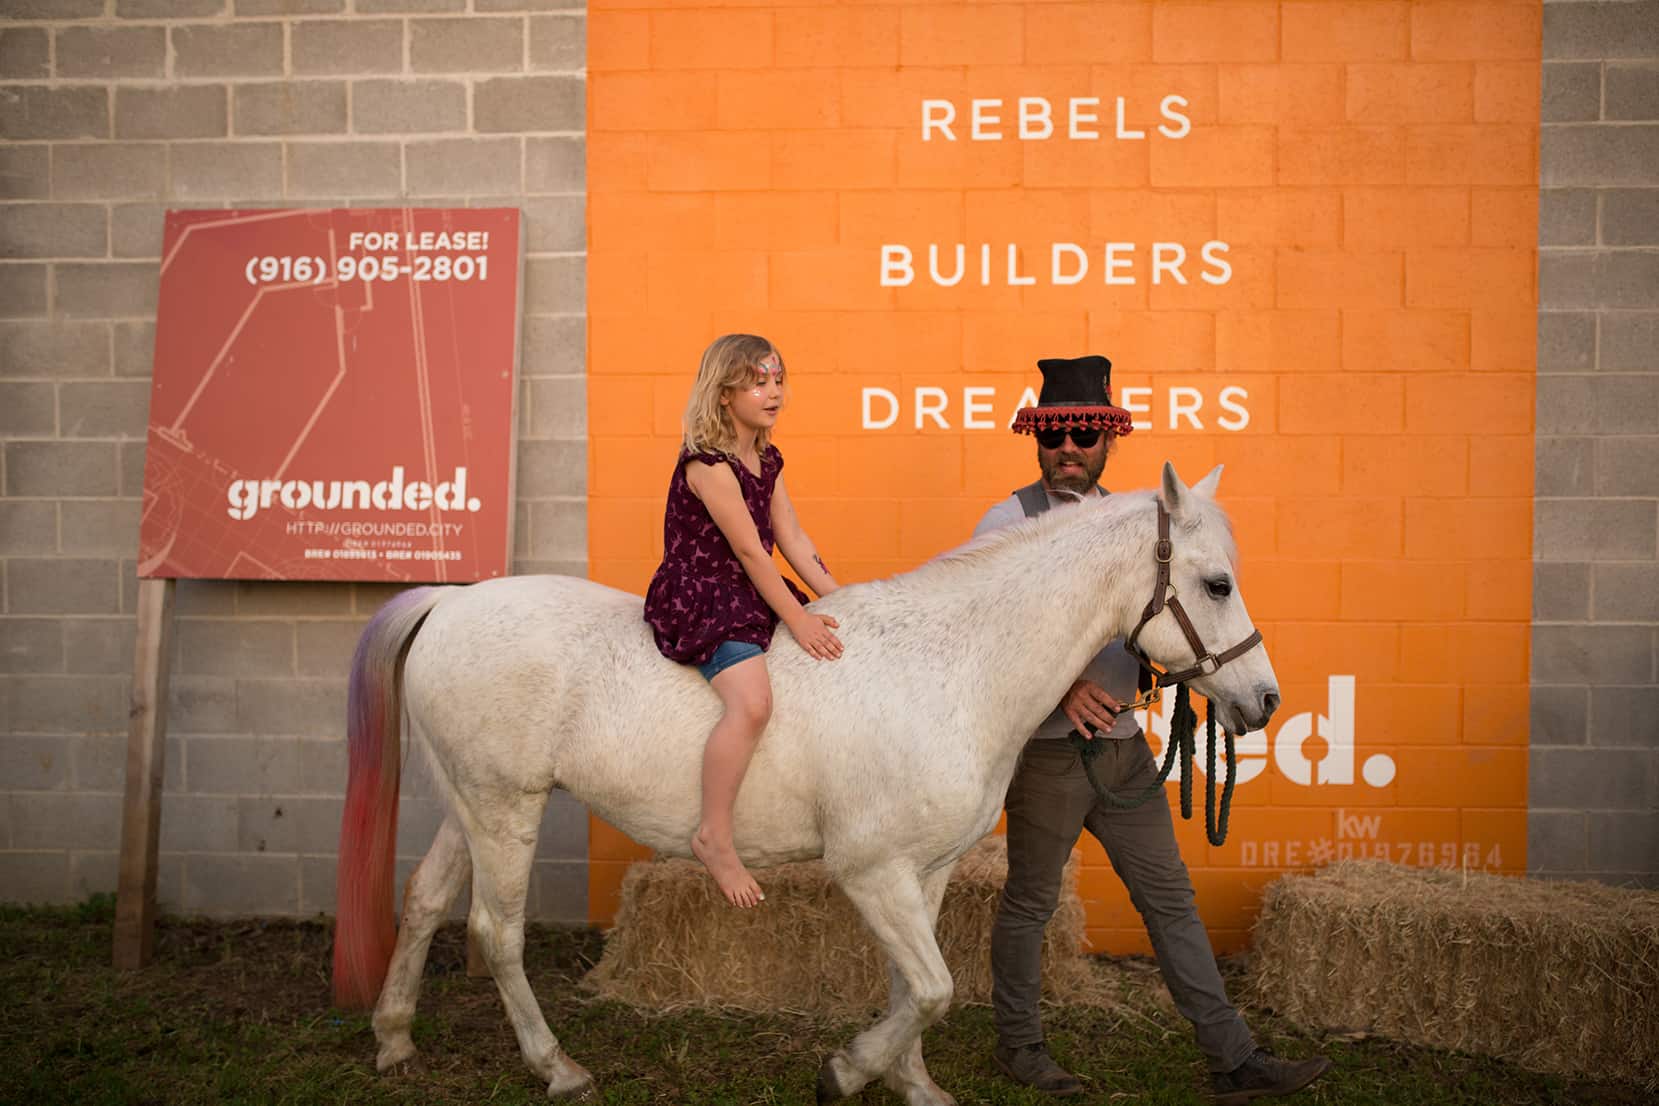 A white horse with a young child riding it, a man in a top hat, and the orange Grounded mural in the background